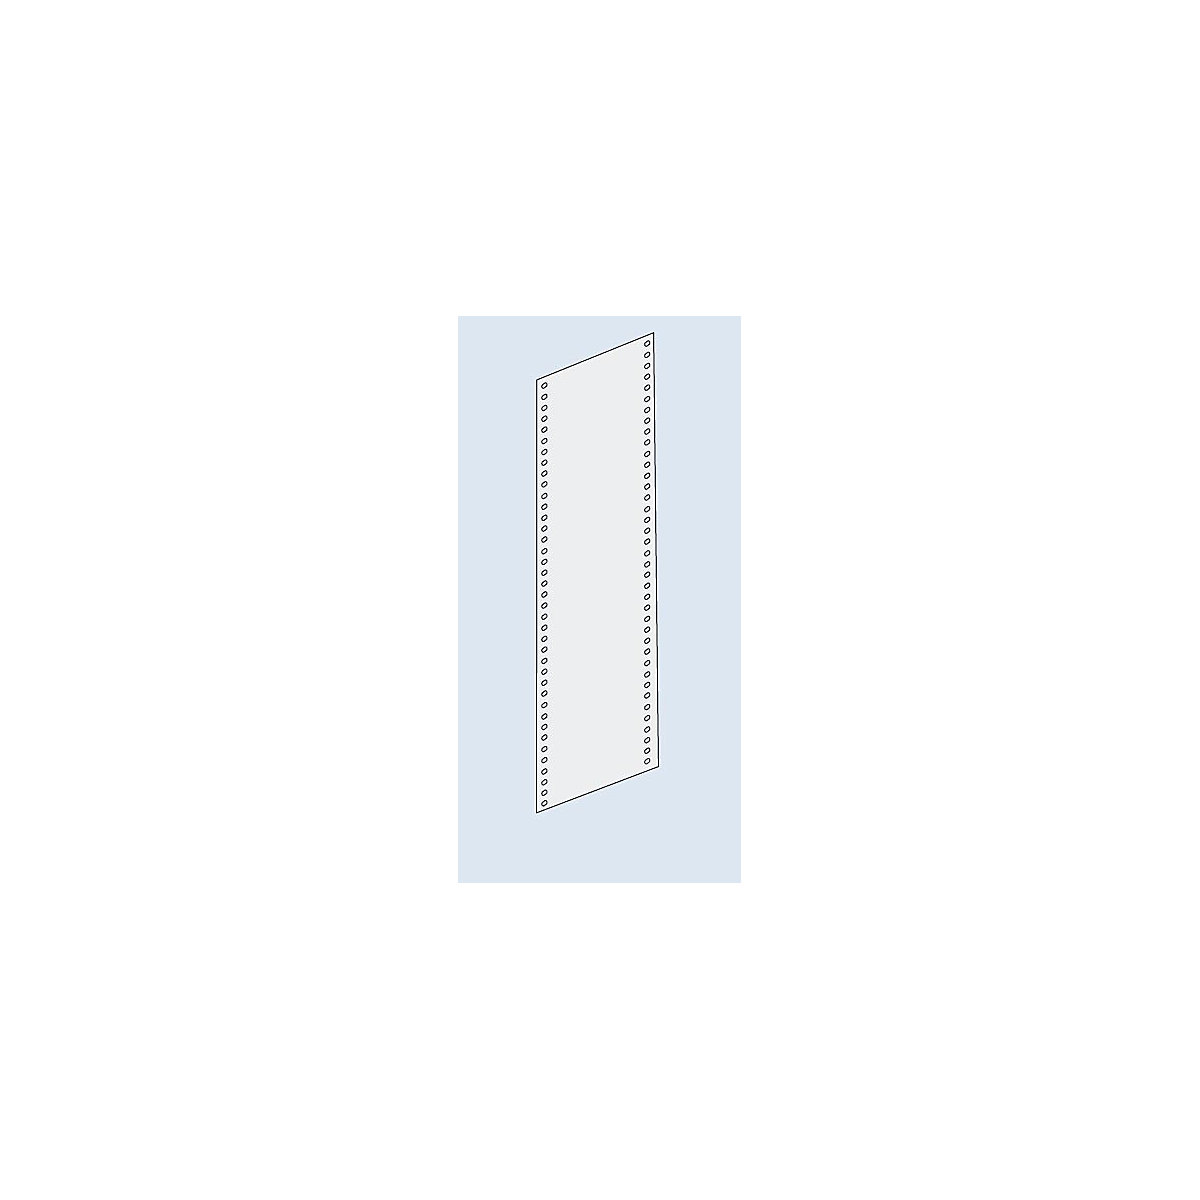 Side panel cladding – eurokraft pro, solid sheet, height 2000 mm, for depth 600 mm, zinc plated-10